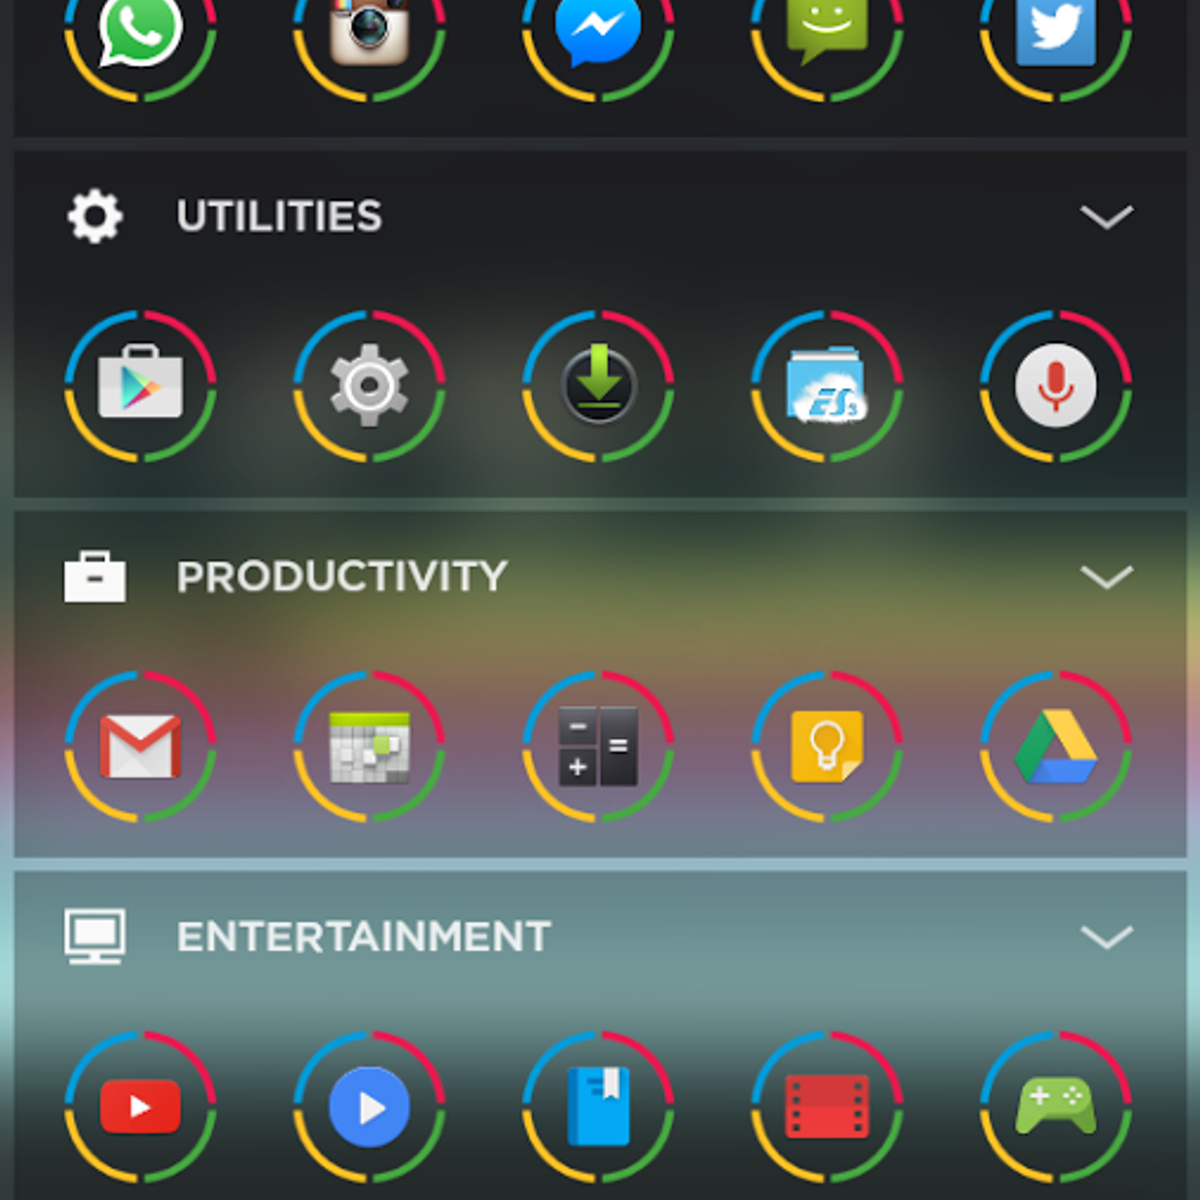 Mac os launcher for android